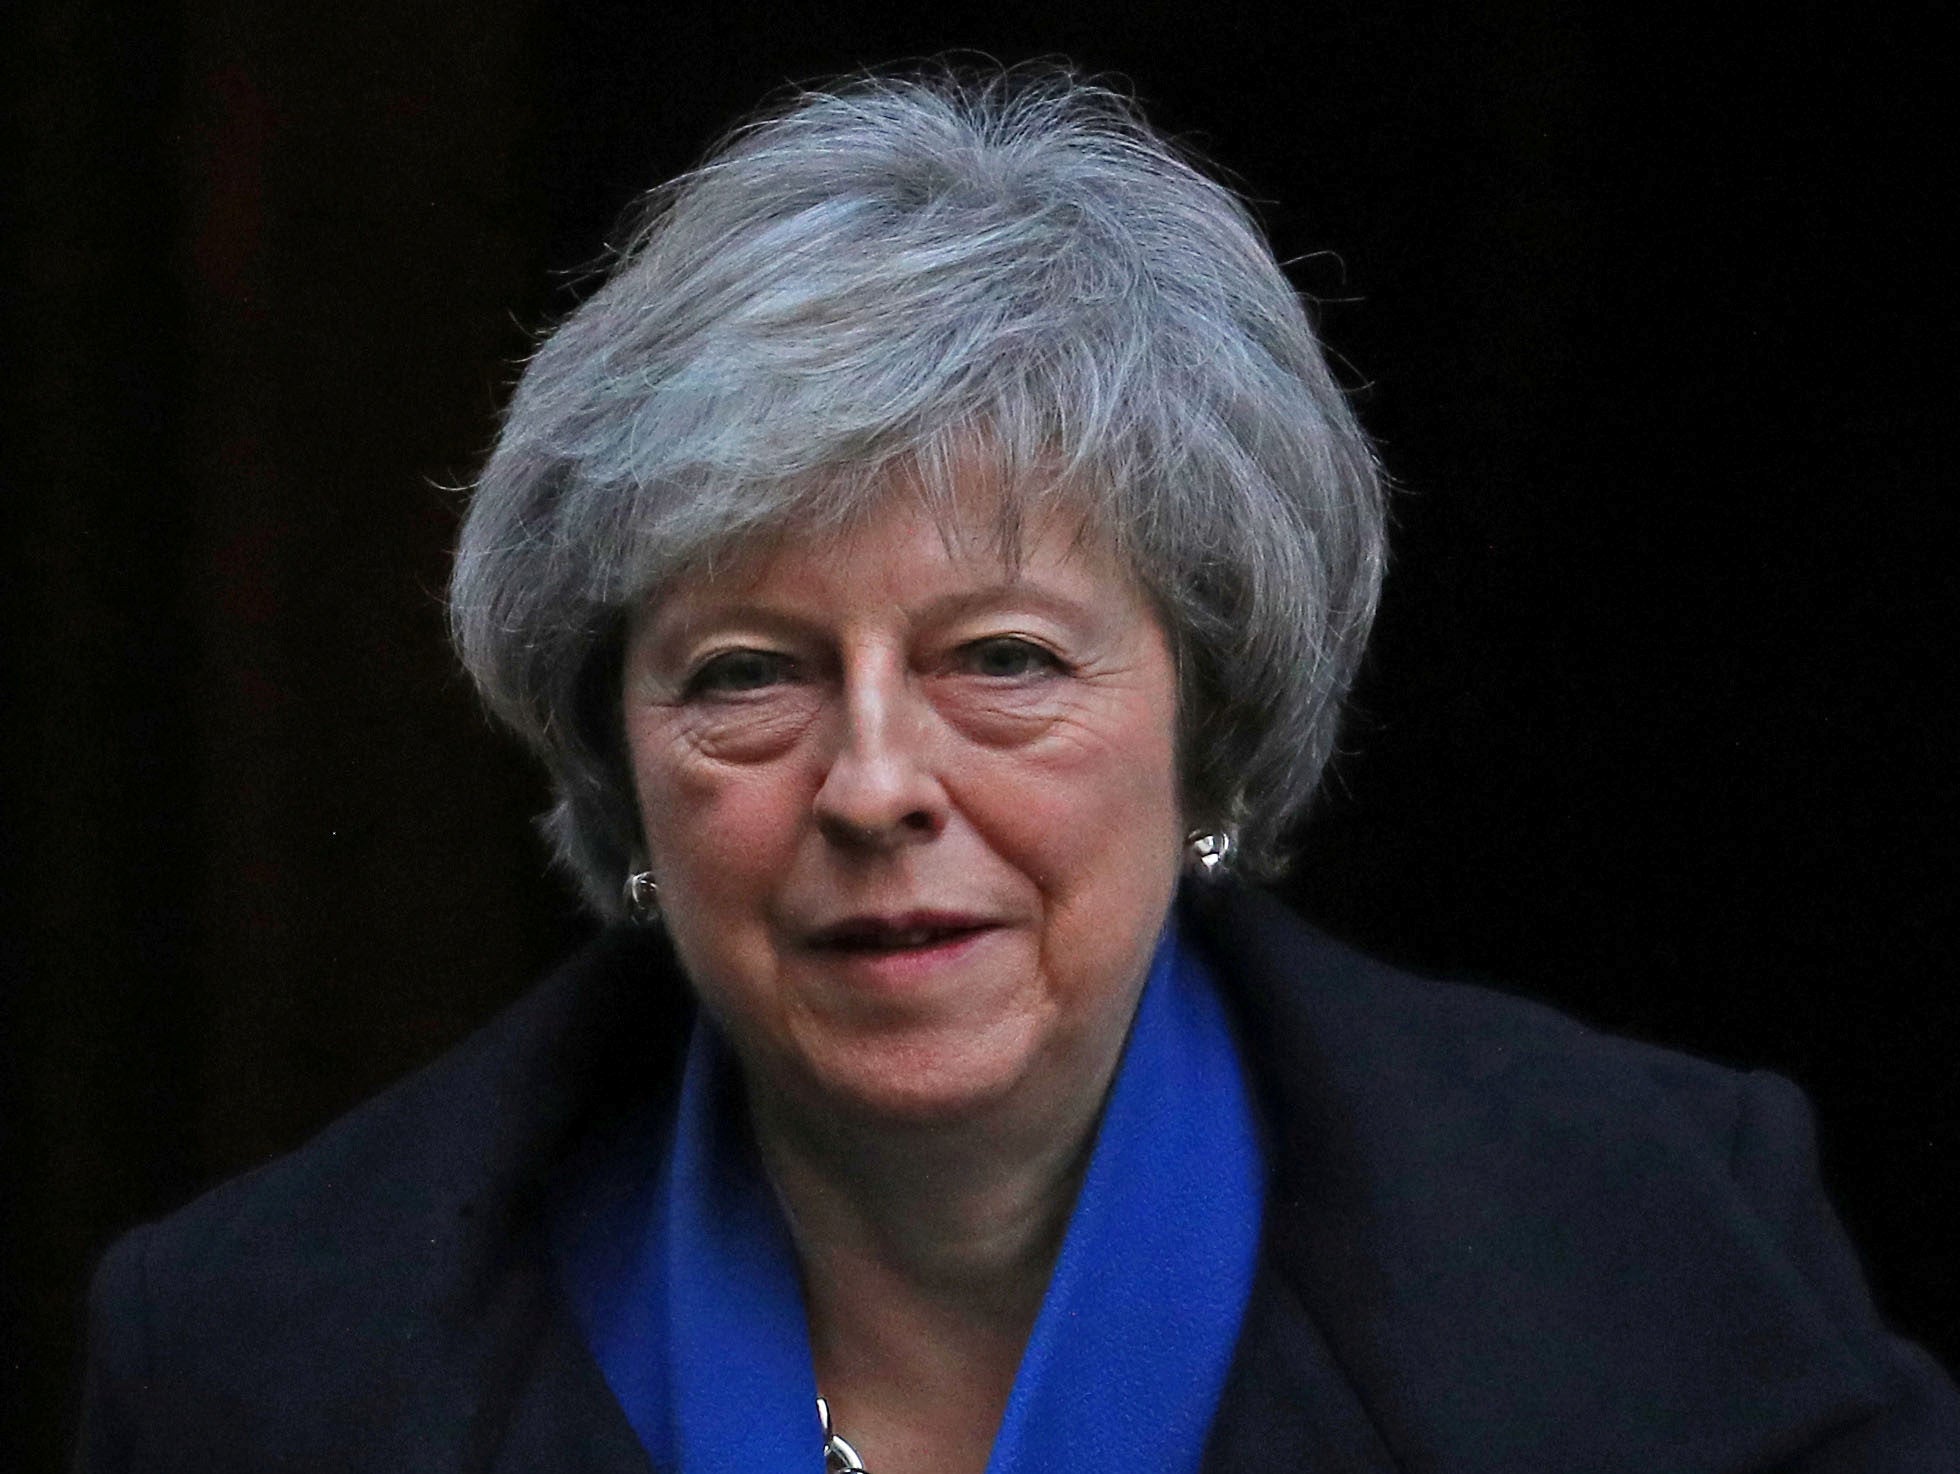 Theresa May courted editors of pro-Brexit newspapers over summer, new data shows